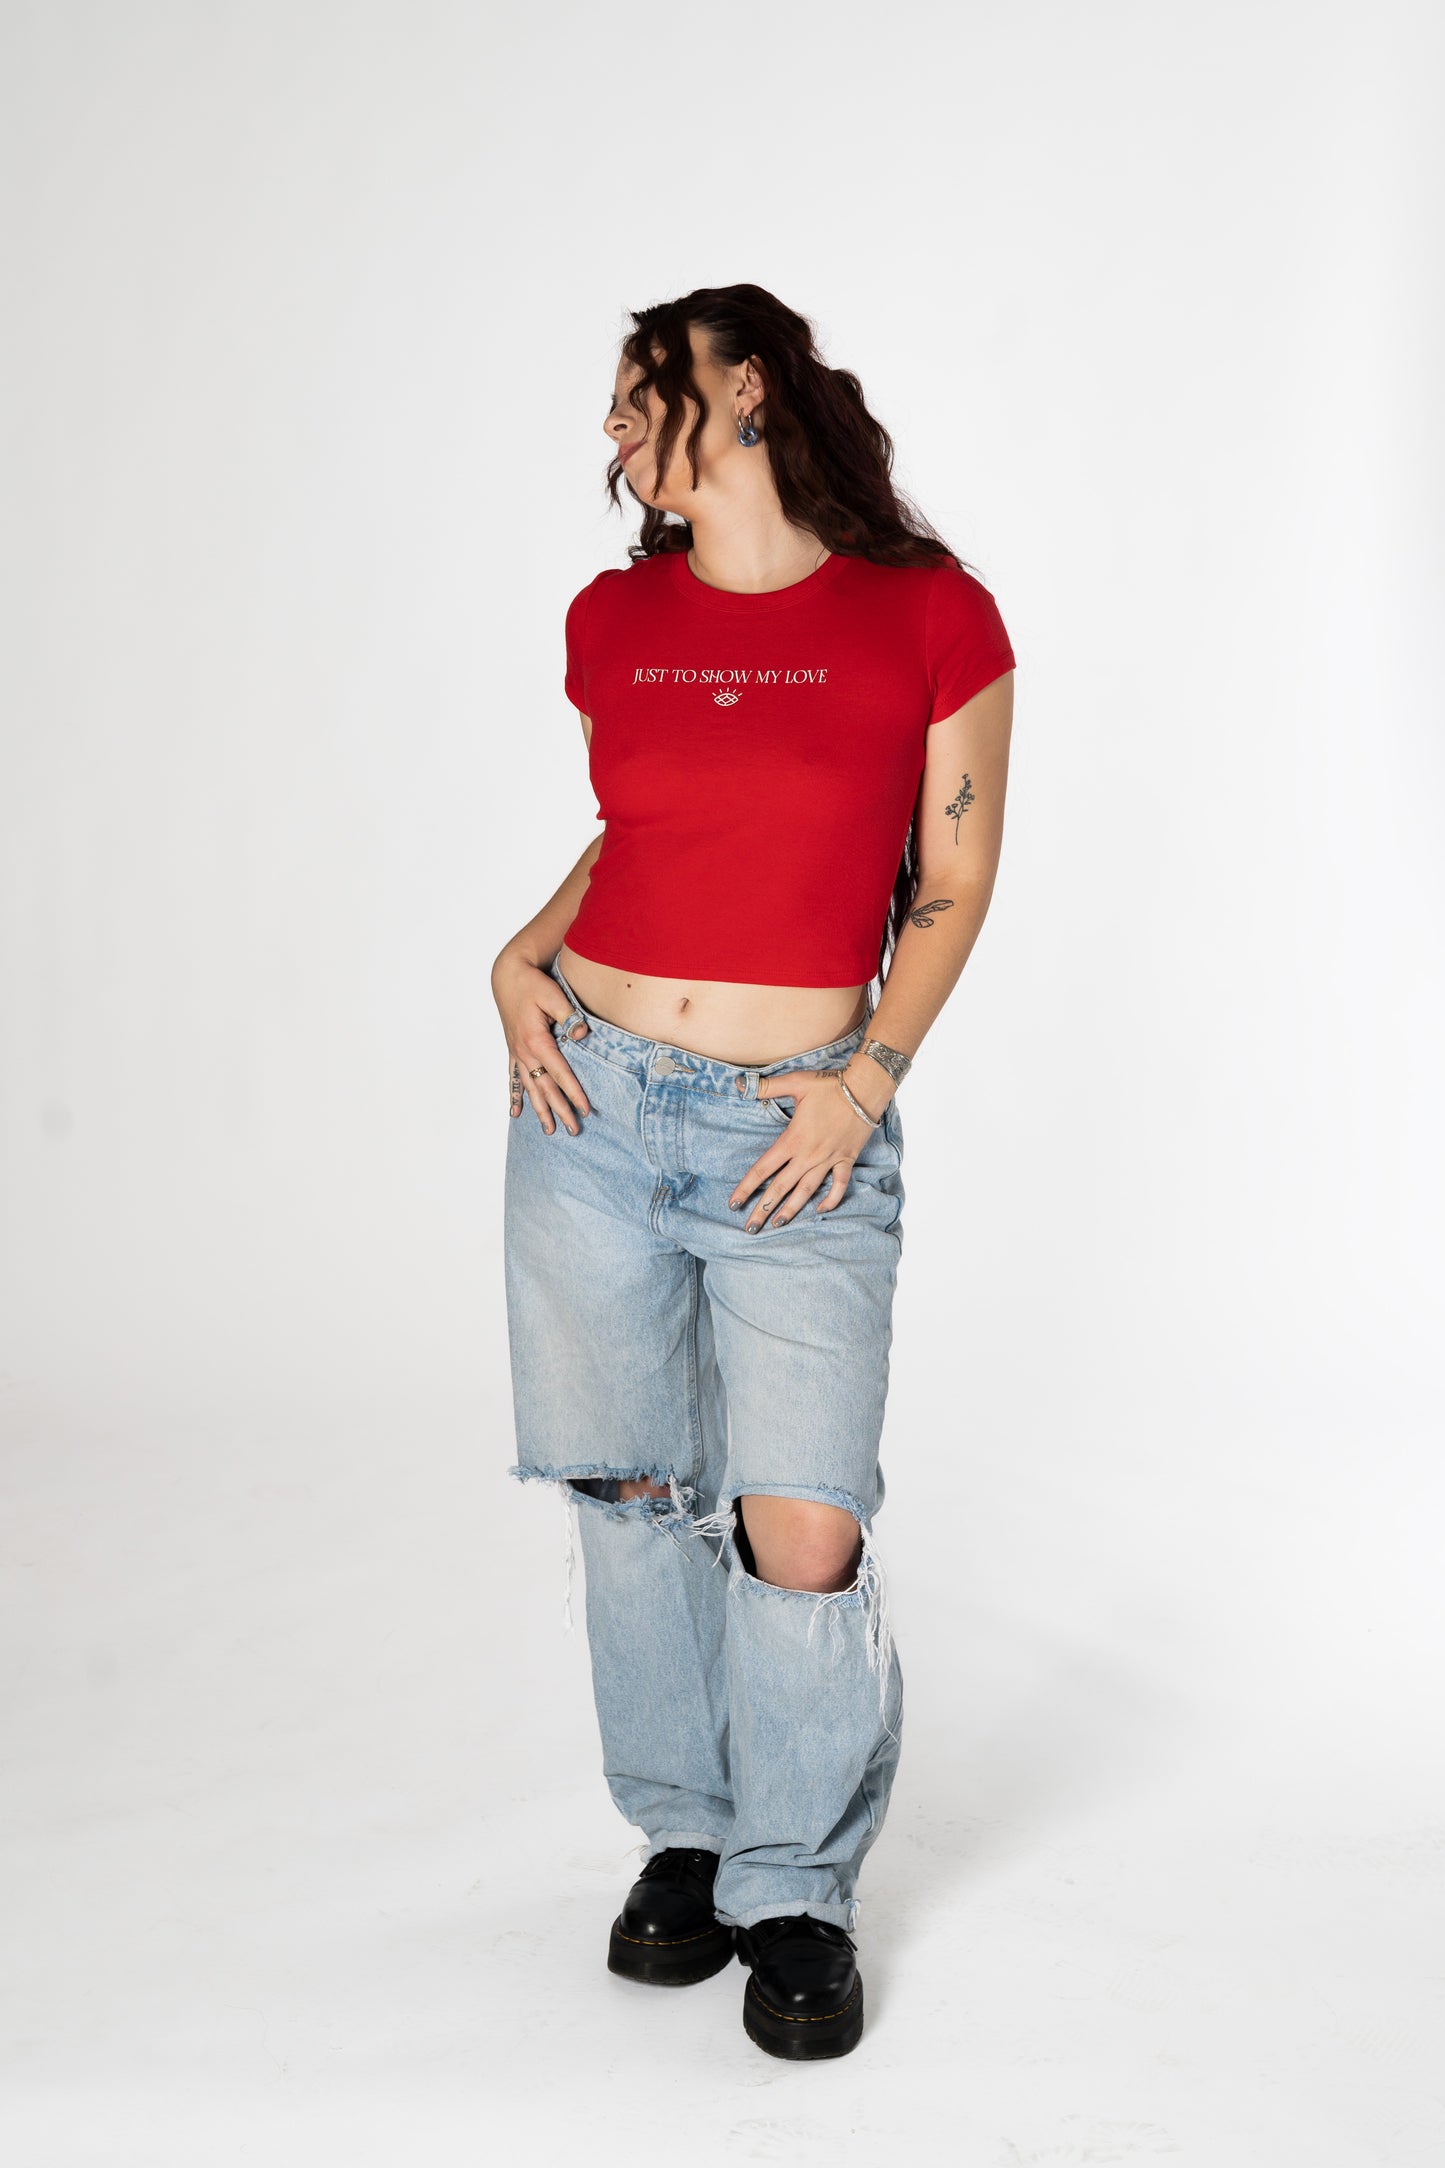 "JUST TO SHOW MY LOVE" Cropped Tee